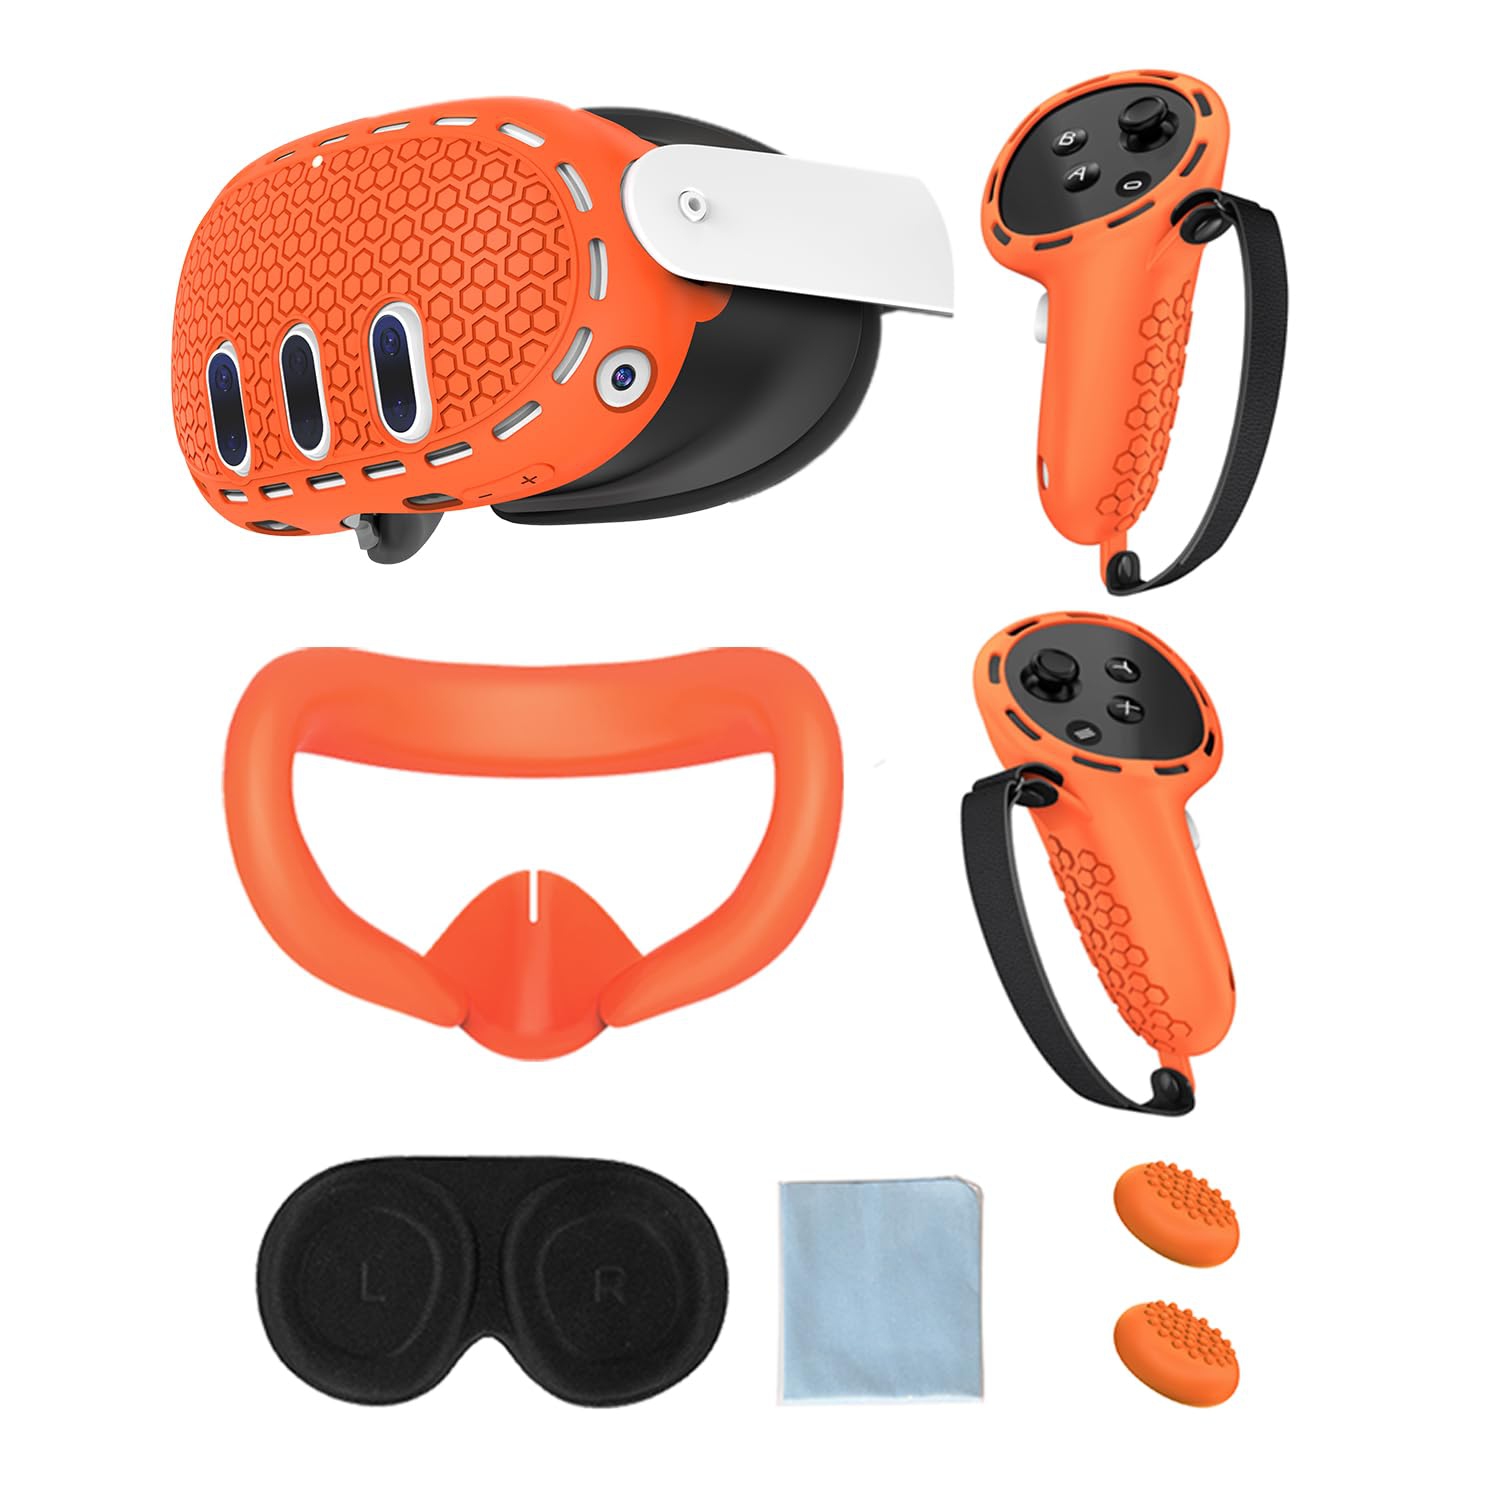 Protective Cover for Oculus/Meta Quest 3 Accessories, Silicone Controllers Grip Cover Protector, Soft Shell Skin with Face Cover and Lens Cover by Gwyoneaon (Orange)